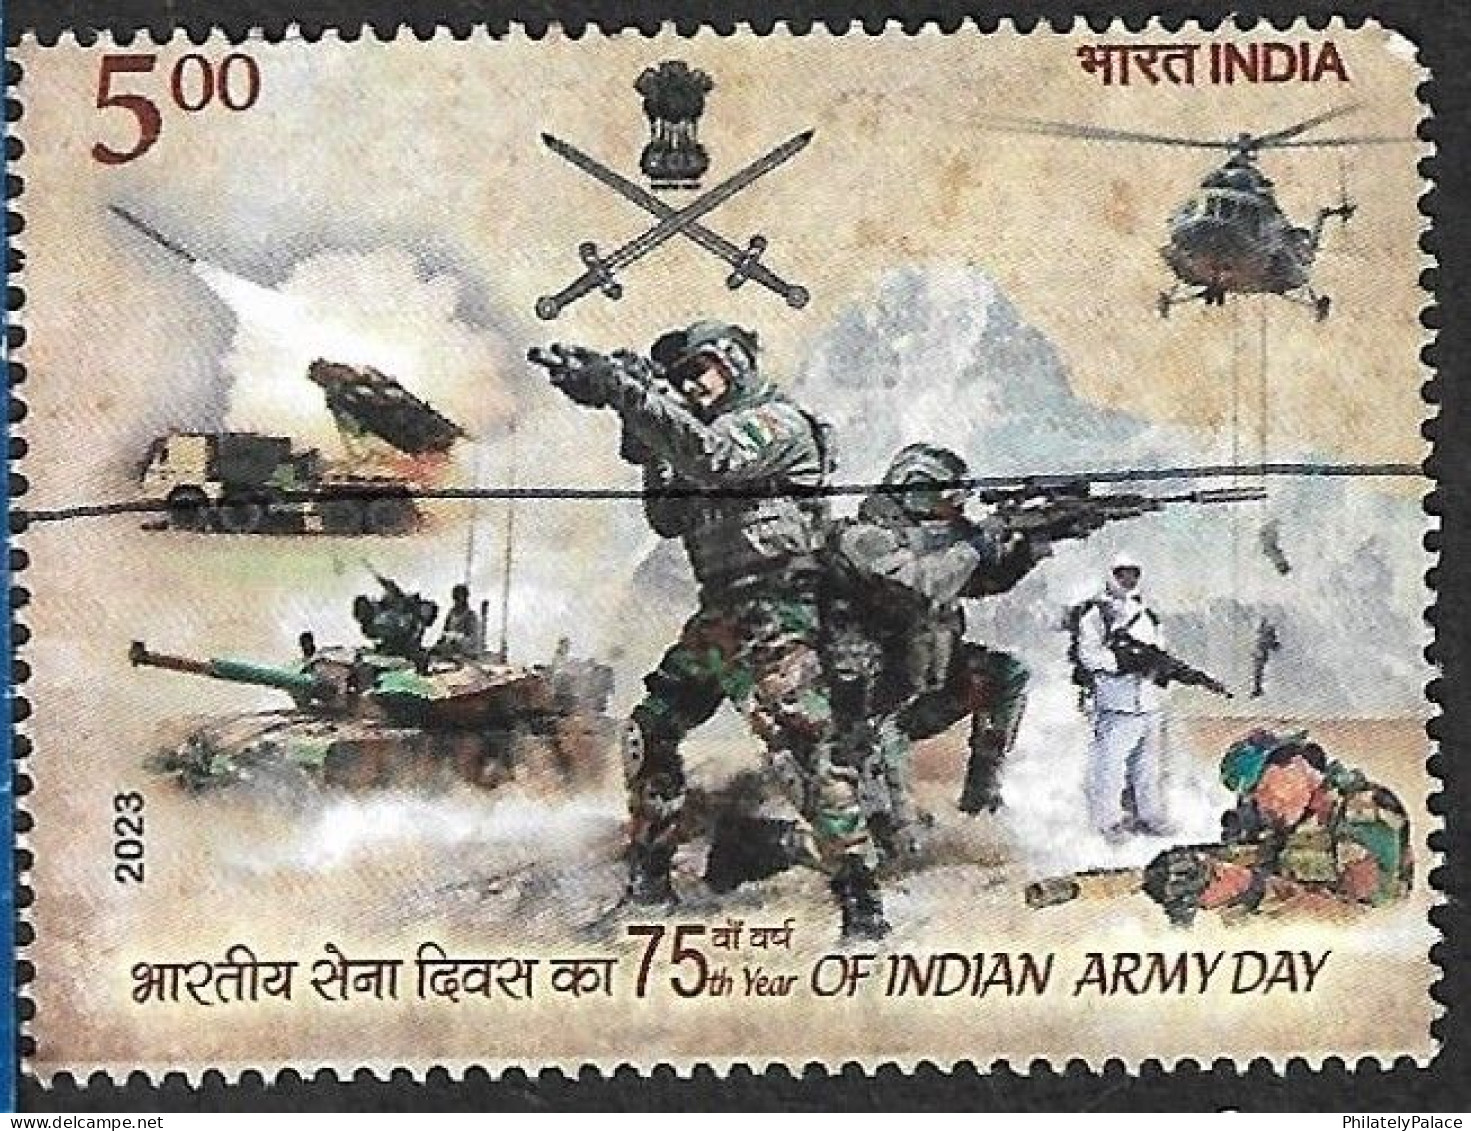 India 2023 Army,Helicopter,Arjun Tank MK III,Gun,Sword,Sniper,Paratroopers,Rocket, War Used PEN Cancelled, Inde Indien - Used Stamps